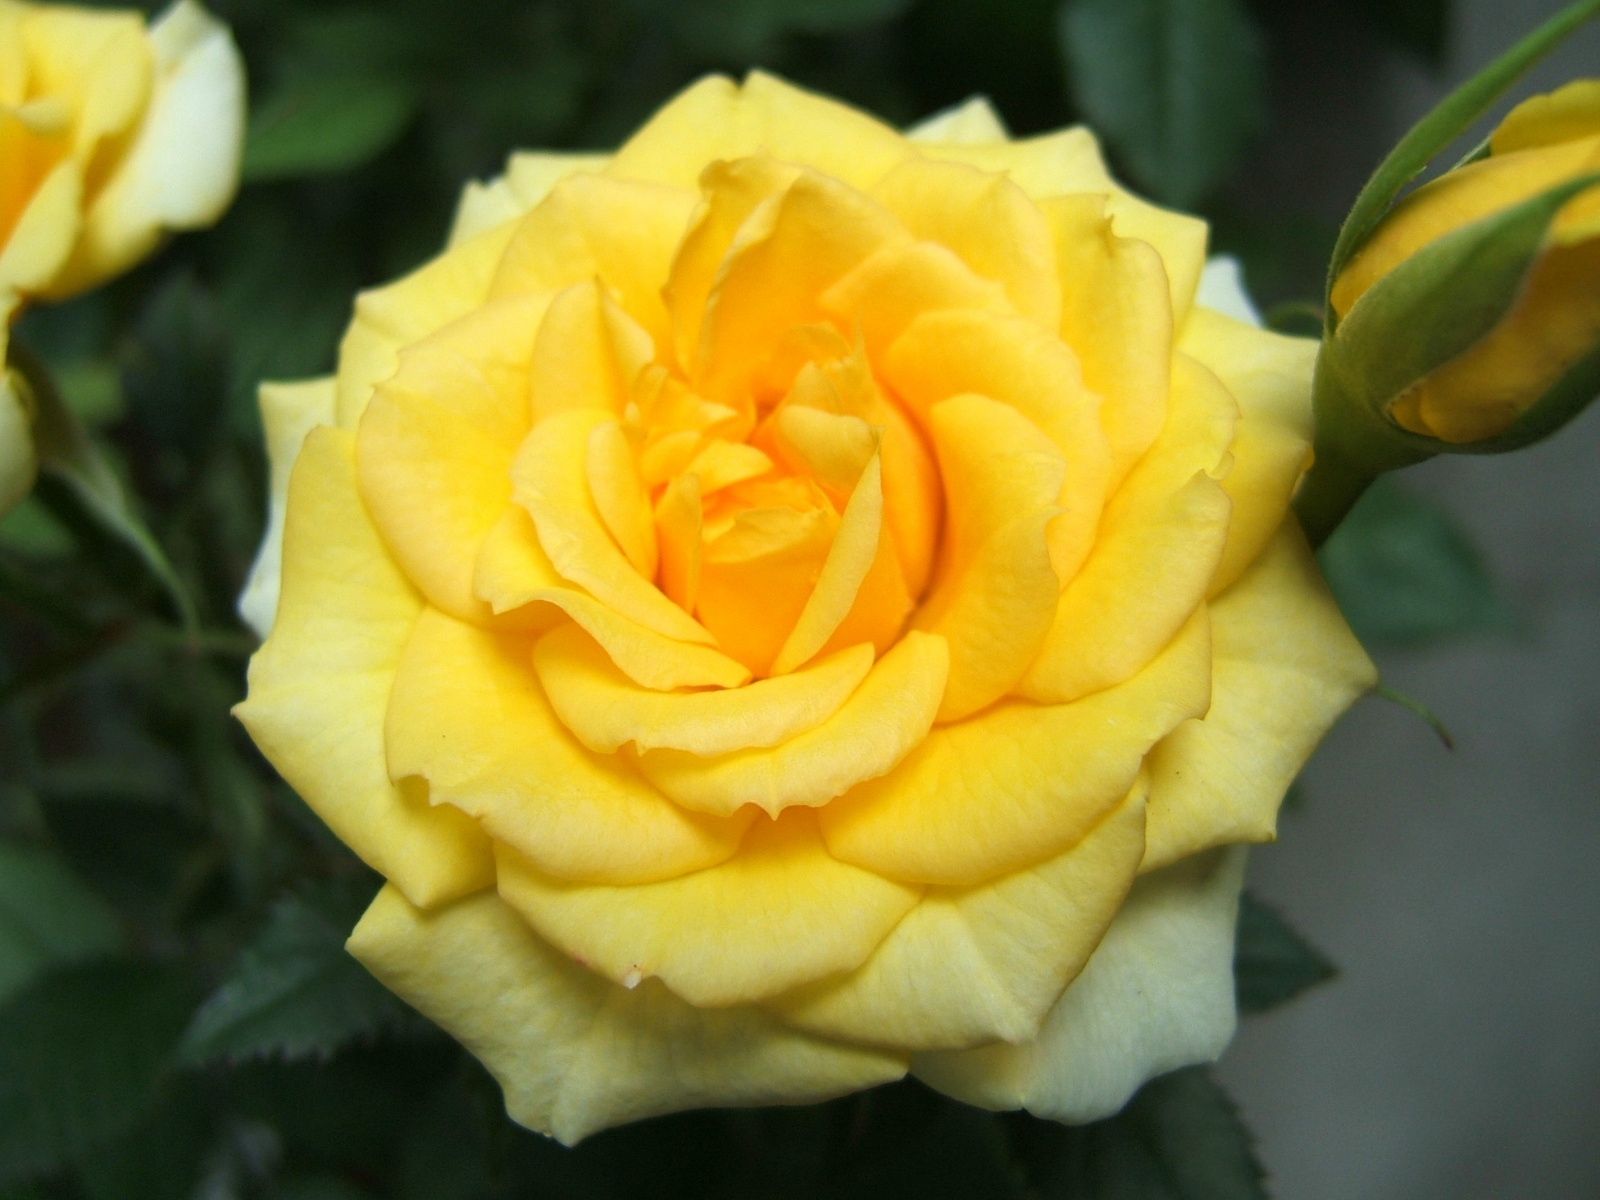 Yellow Rose Images Hd Download - HD Wallpaper 